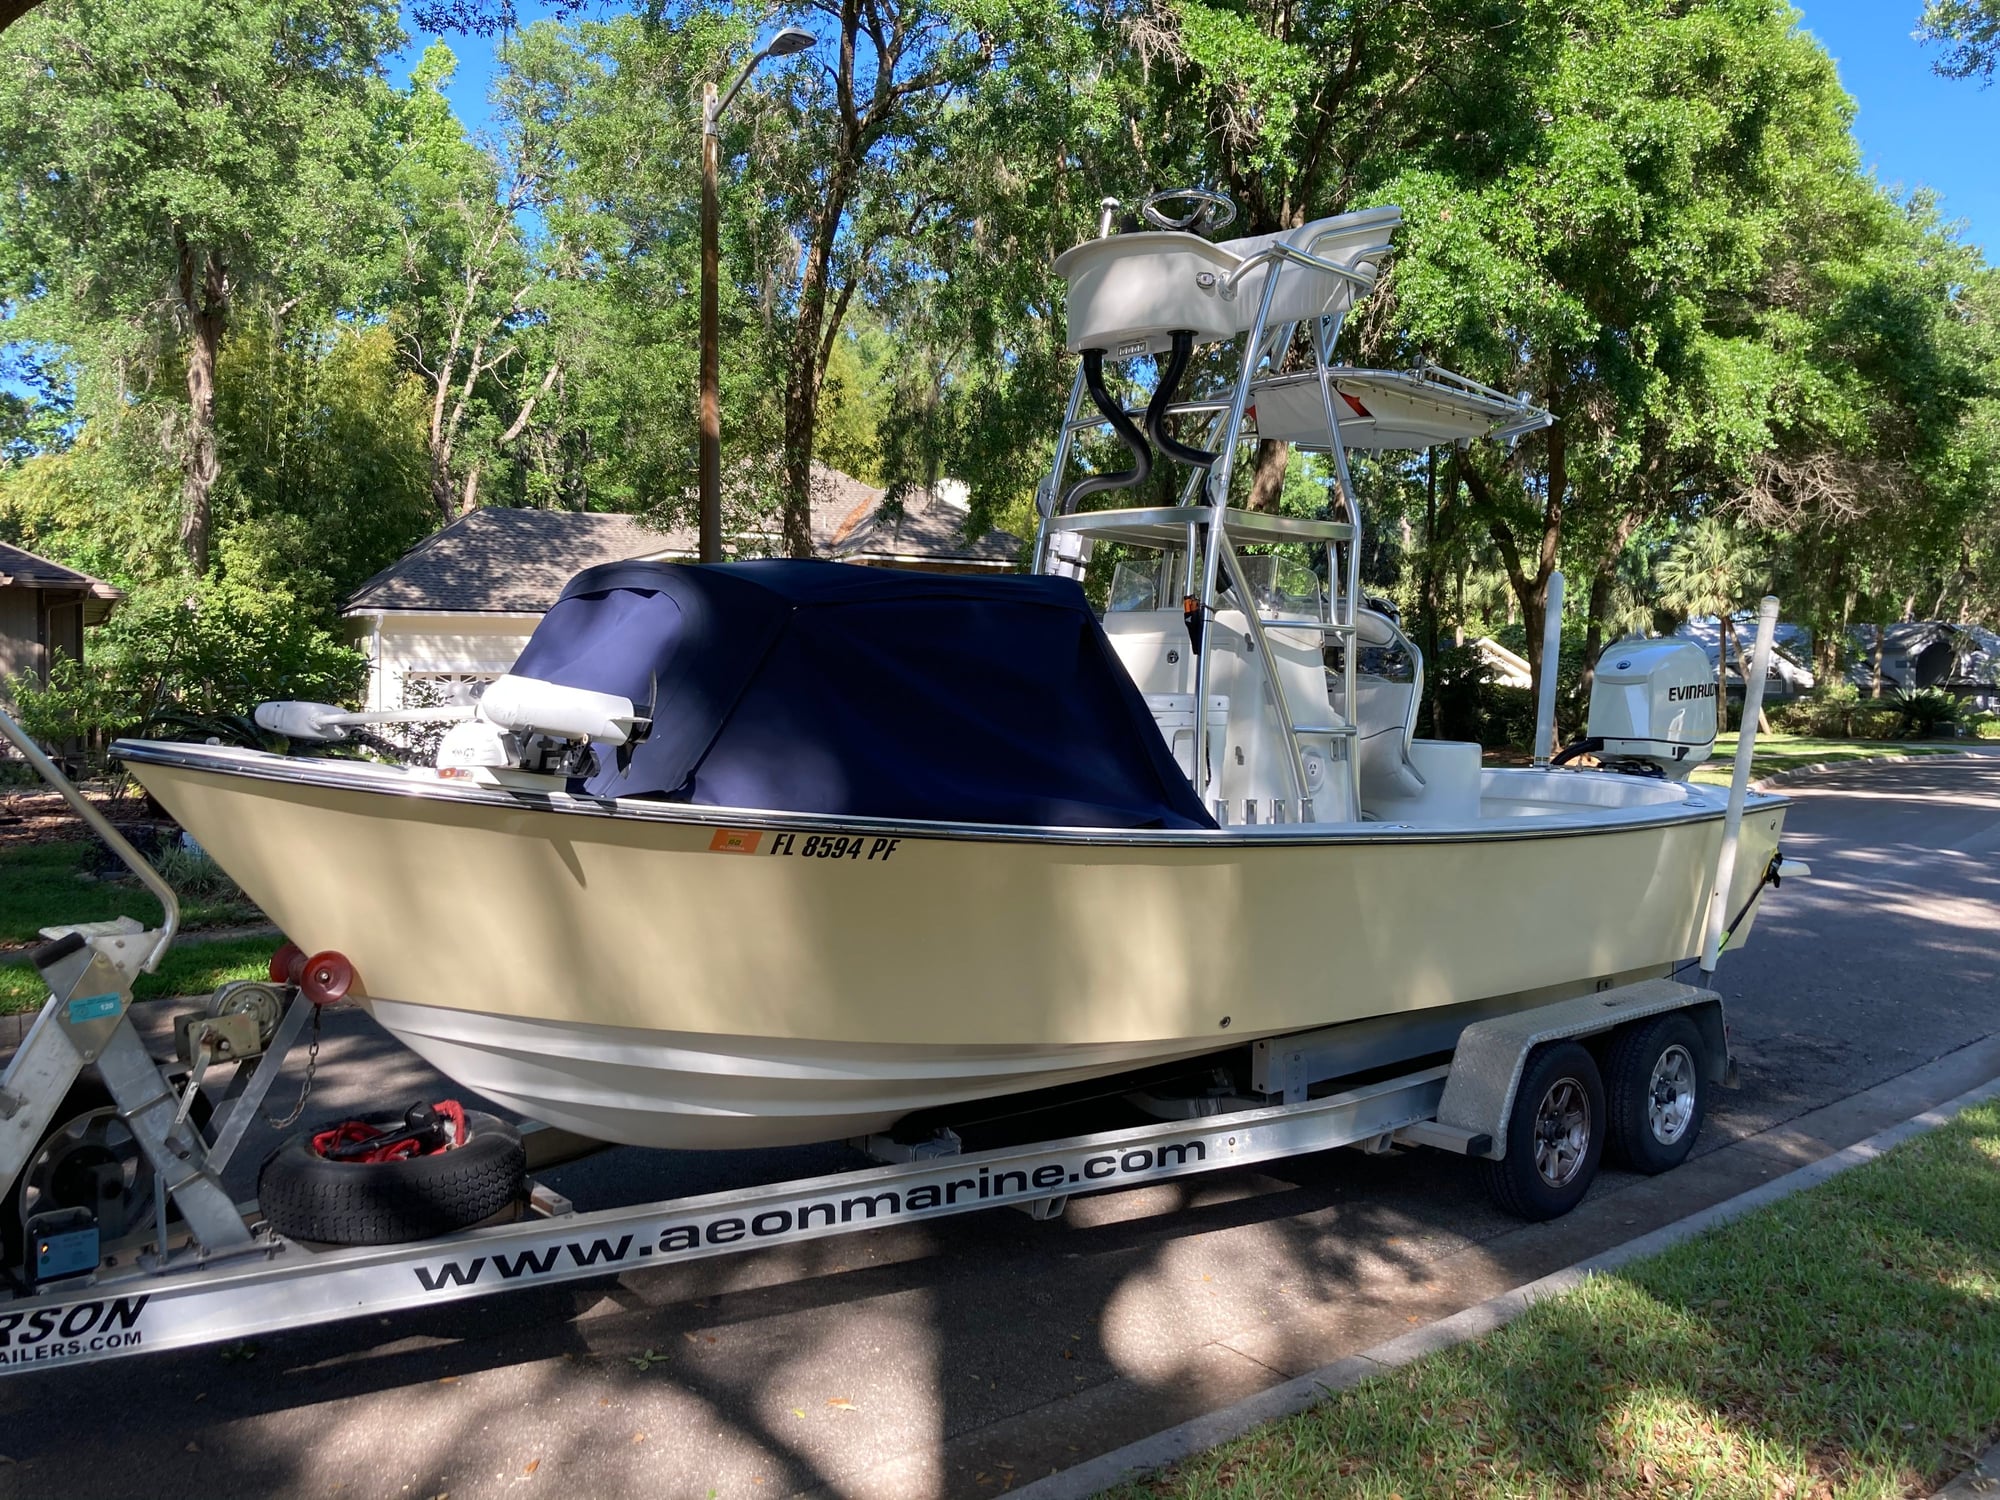 WTB: Bay boat with 3/4 tower, newer power, under 50k - The Hull Truth -  Boating and Fishing Forum